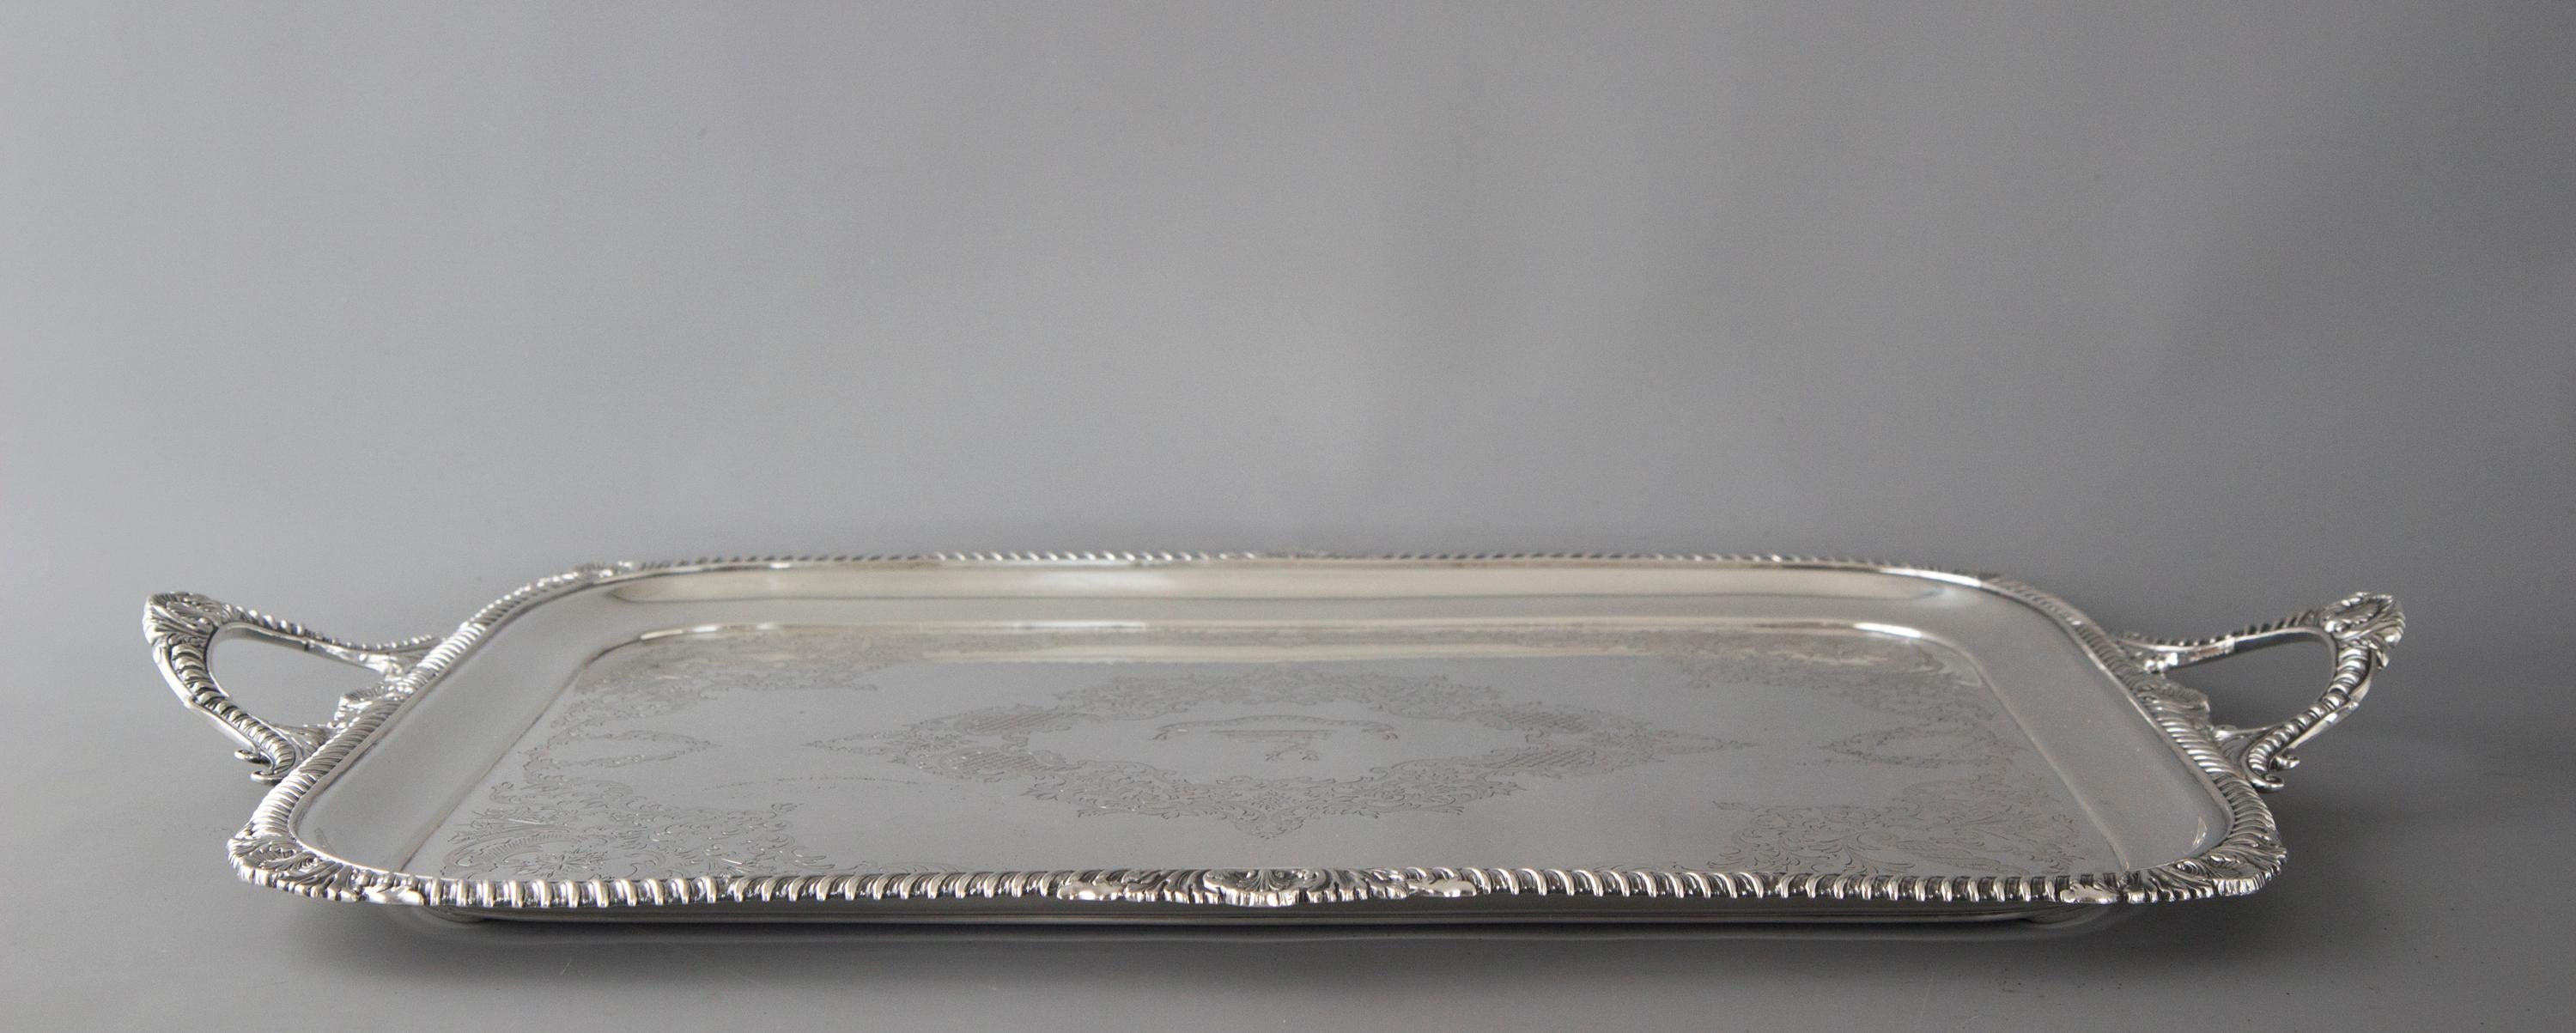 Victorian Silver Tea or Drinks Tray, Sheffield, 1899 by Atkin Brothers 3